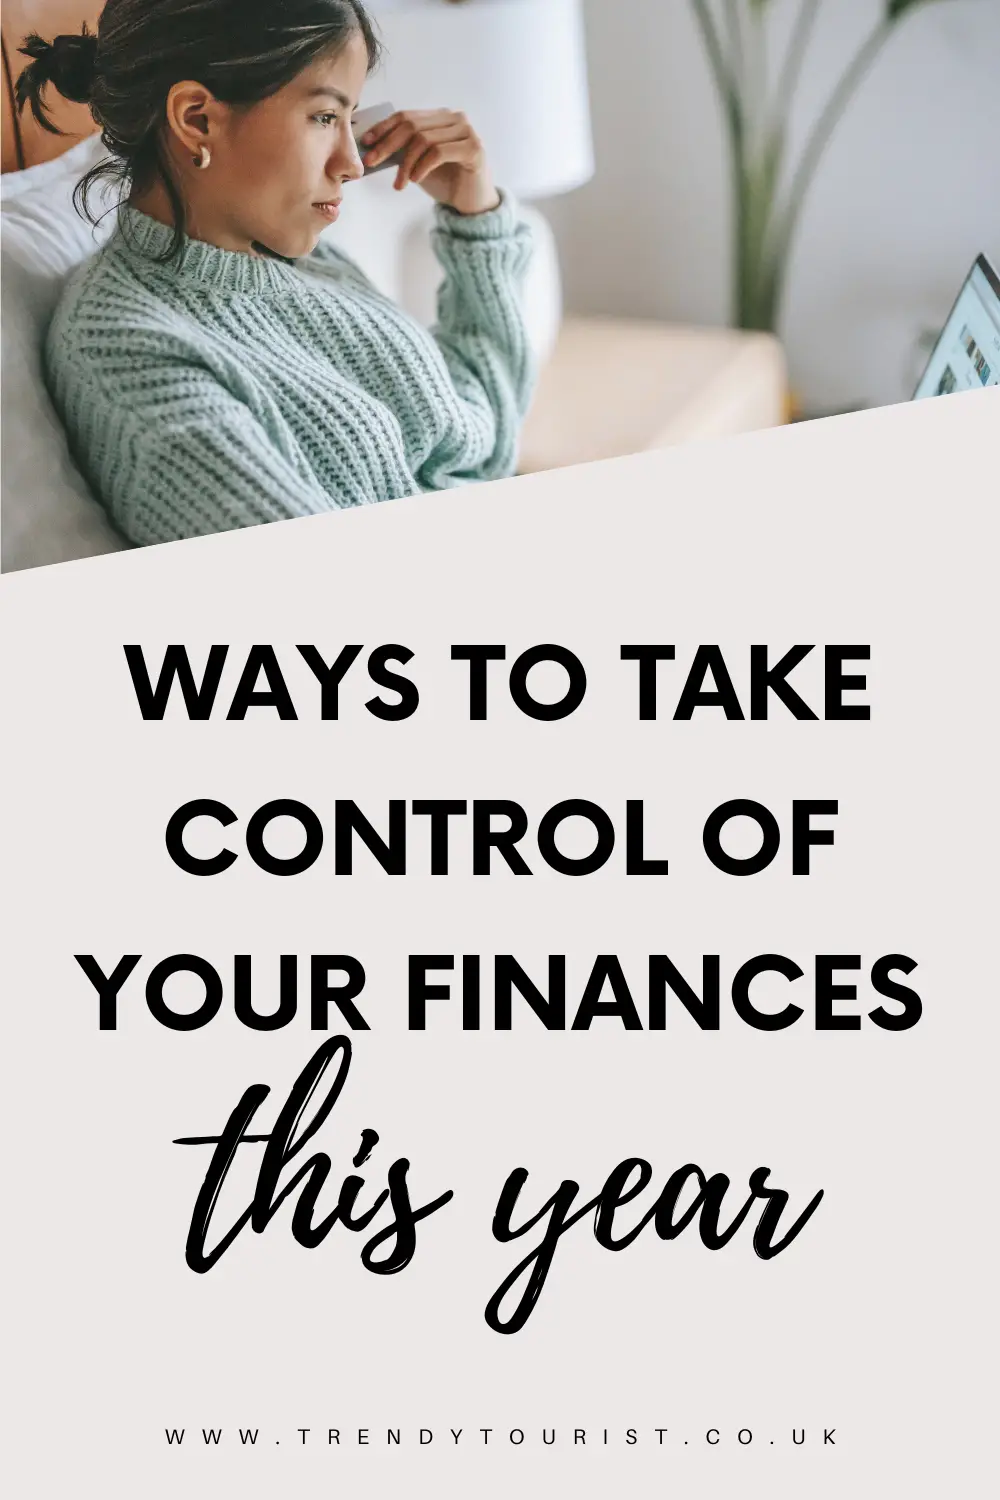 Ways to Take Control of Your Finances This Year